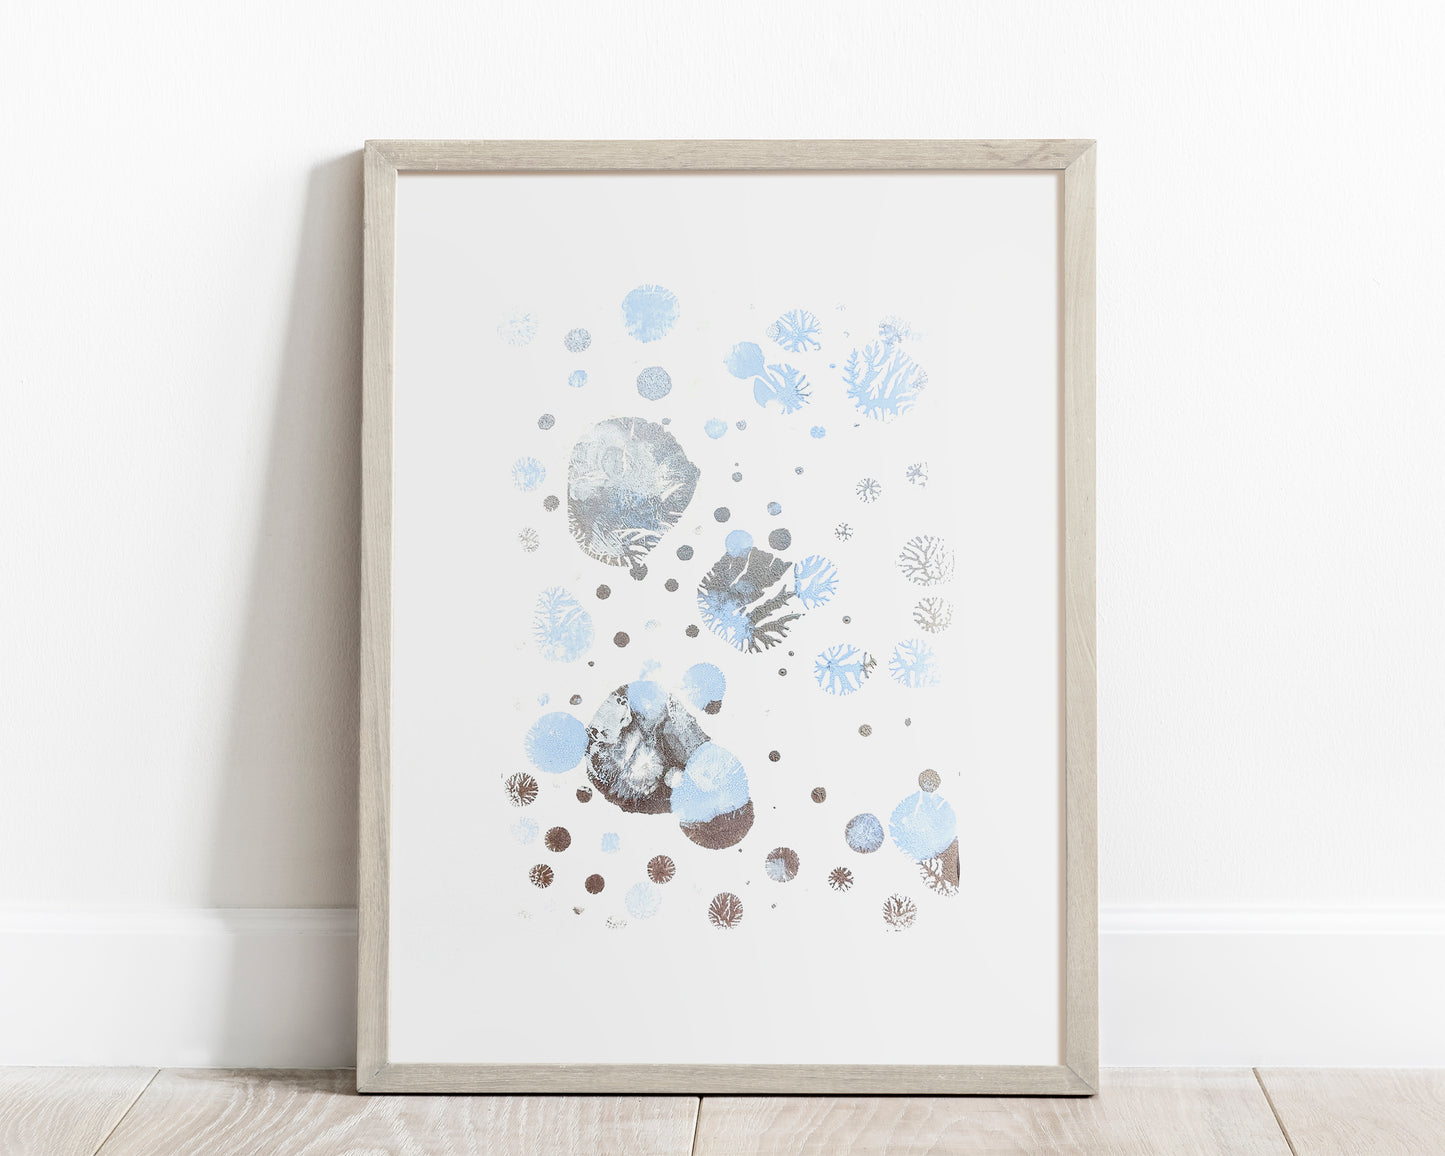 N2 Blue and silver abstract snowflakes 12x16in Monotype print Holiday winter wall art for Christmas festive living room decor UNFRAMED, Bedroom wall decor, Printmaking art handmade, one copy unique, relief print	, Original artwork, Noel decoration, Minimalist art decor